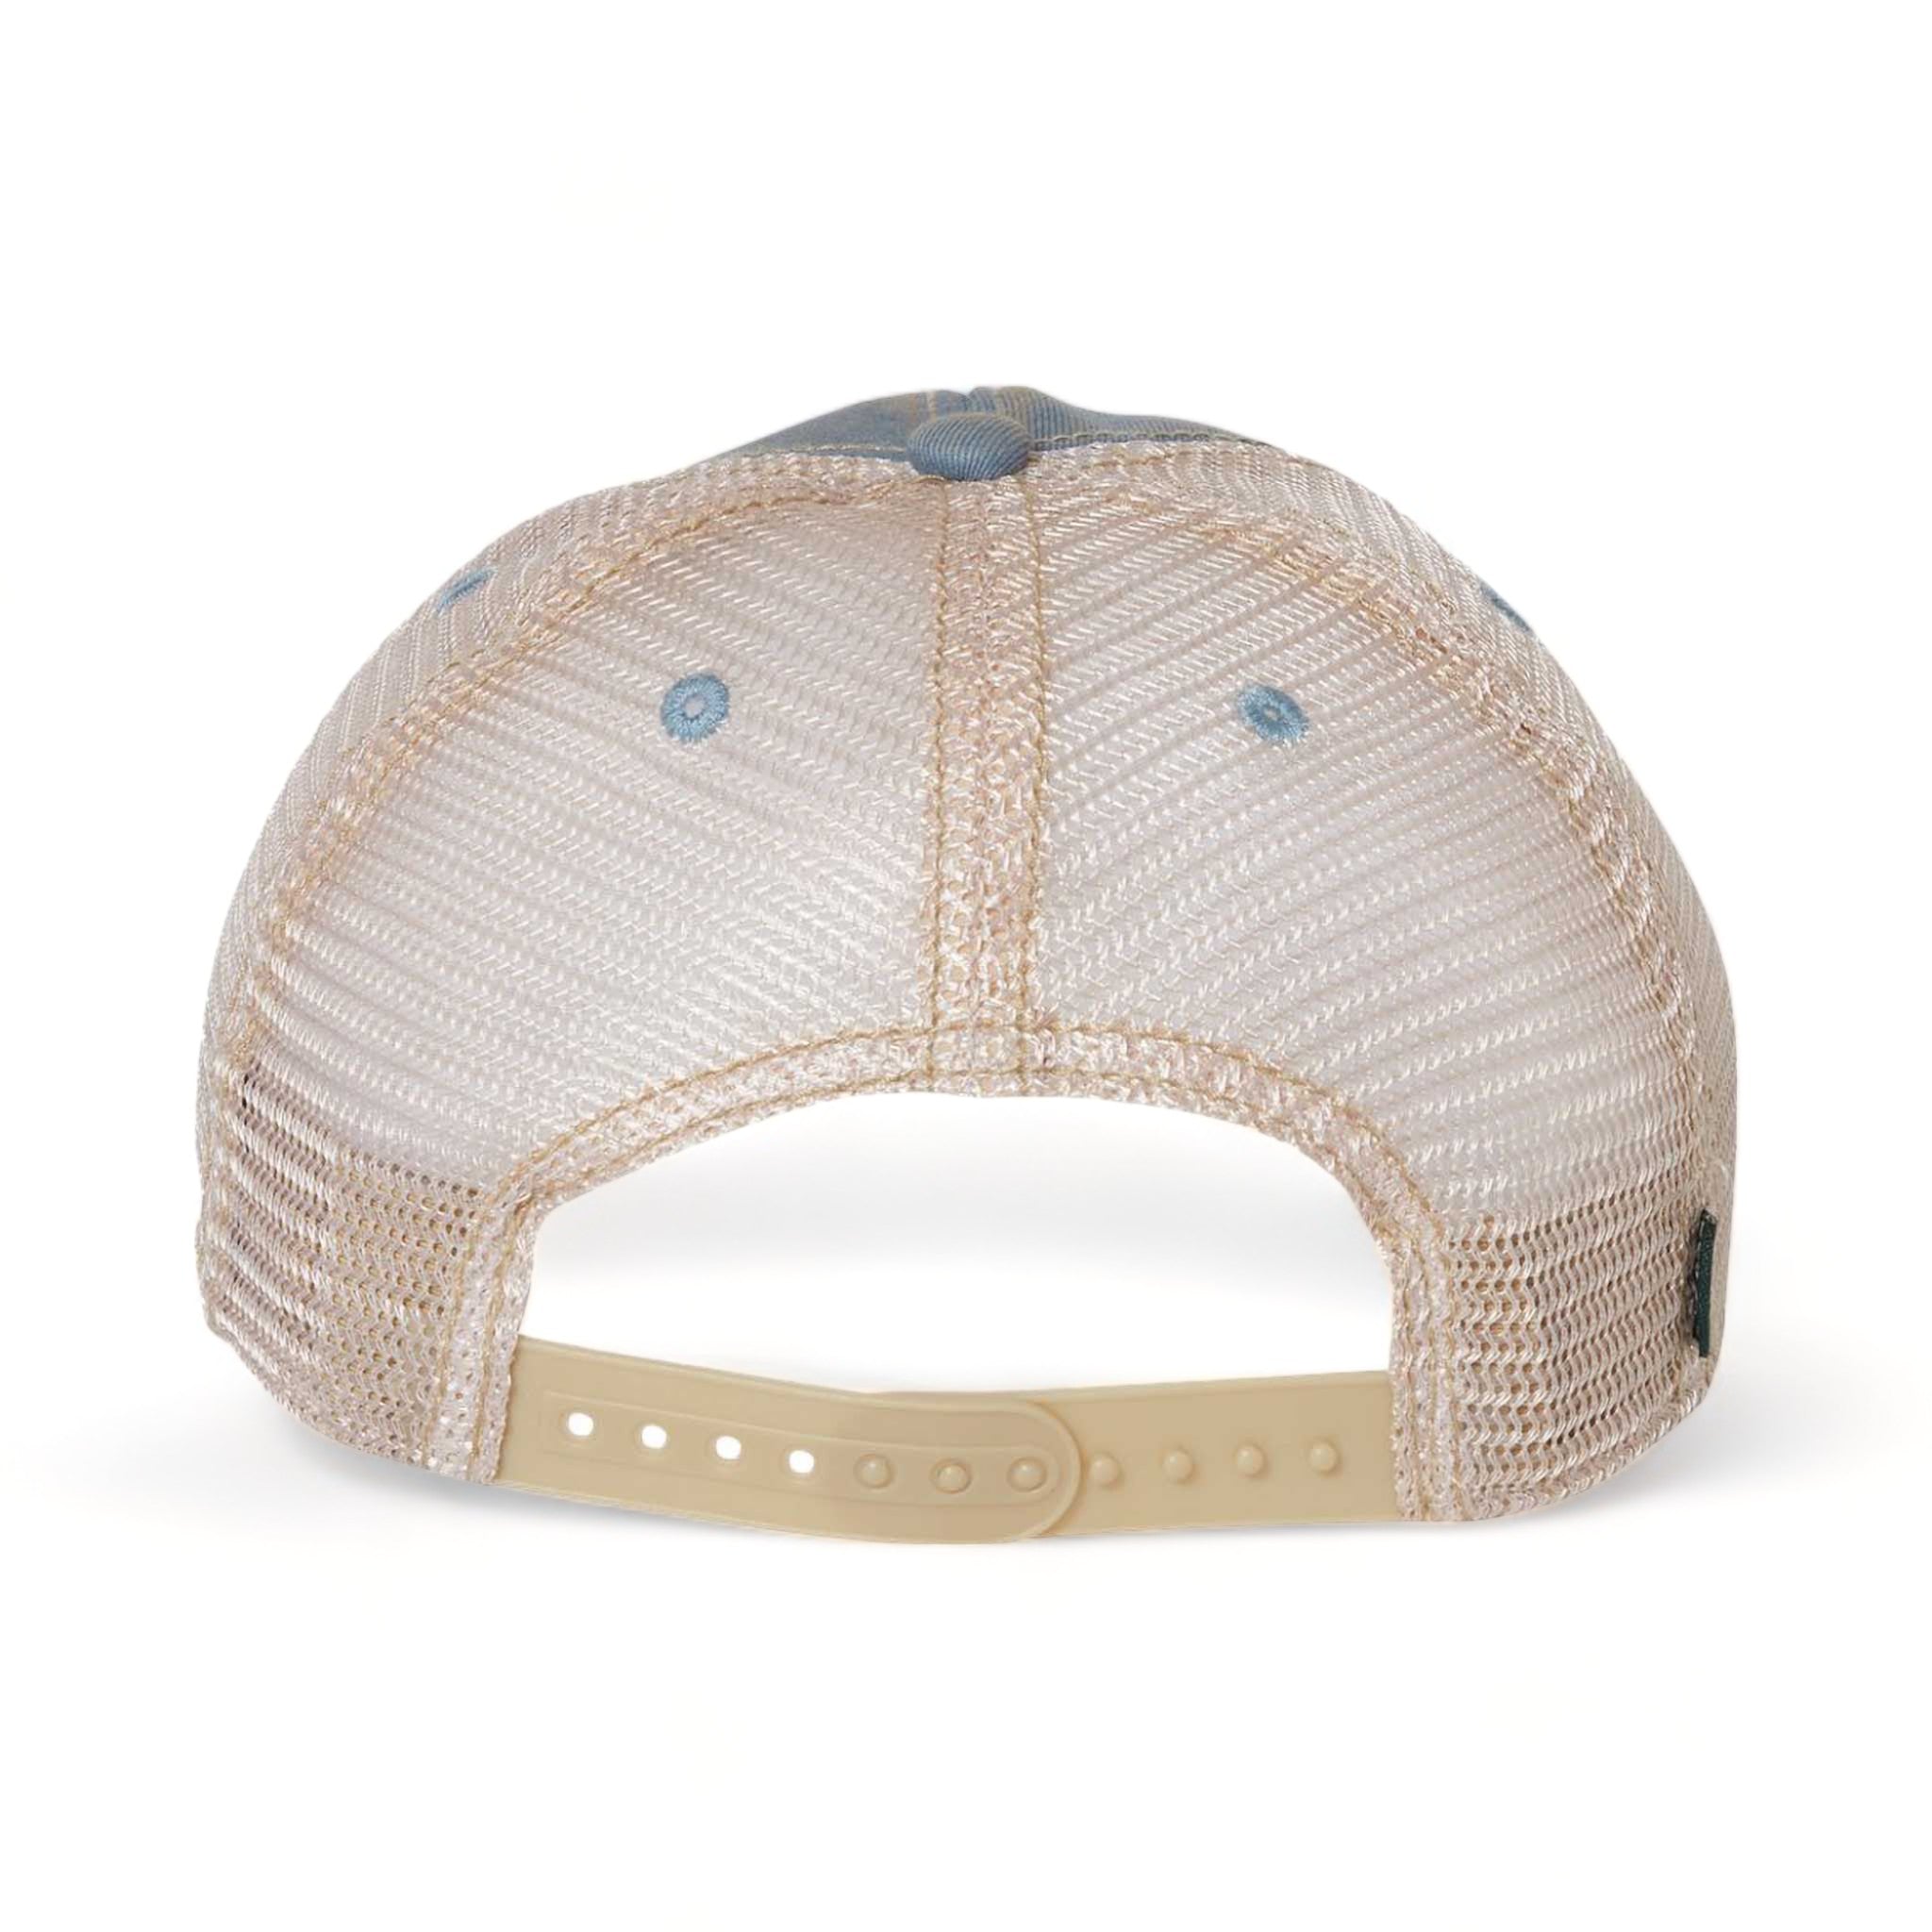 Back view of LEGACY OFA custom hat in light blue and khaki